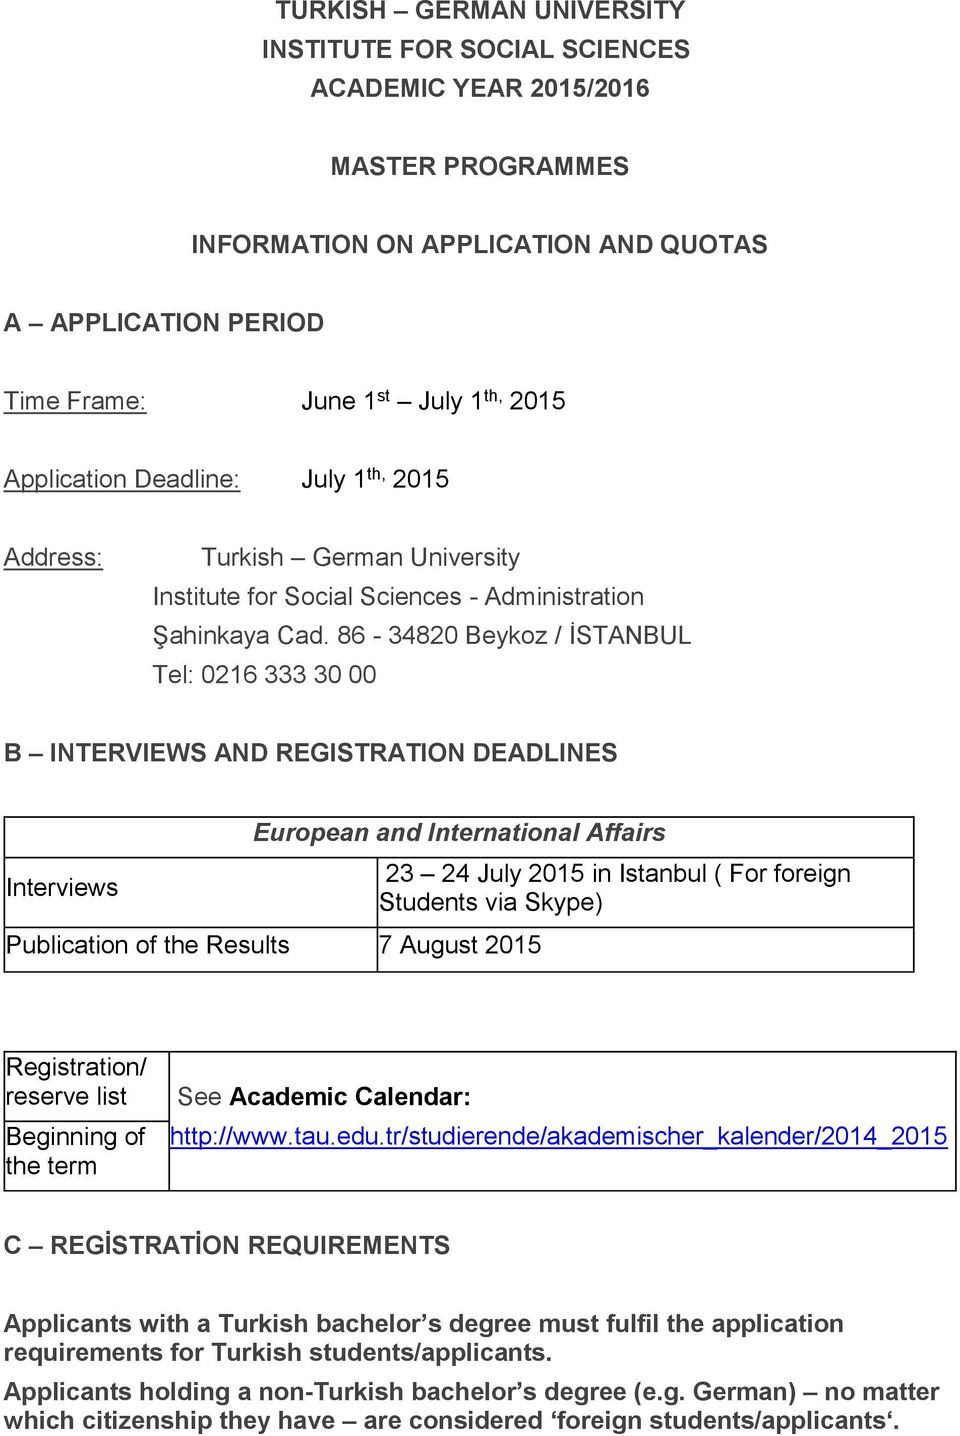 86-34820 Beykoz / İSTANBUL Tel: 0216 333 30 00 B INTERVIEWS AND REGISTRATION DEADLINES Interviews European and International Affairs Publication of the Results 7 August 2015 23 24 July 2015 in